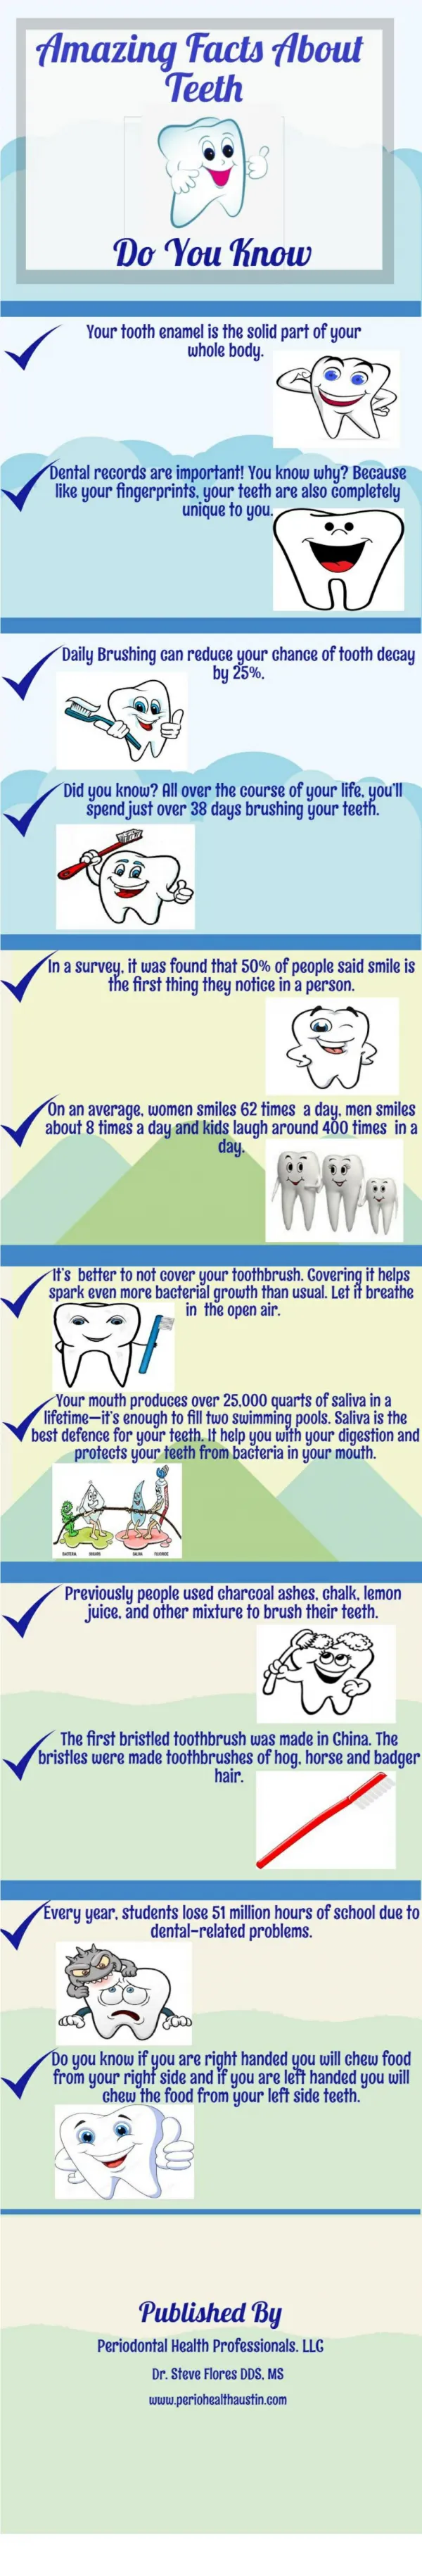 Amazing facts about Teeth